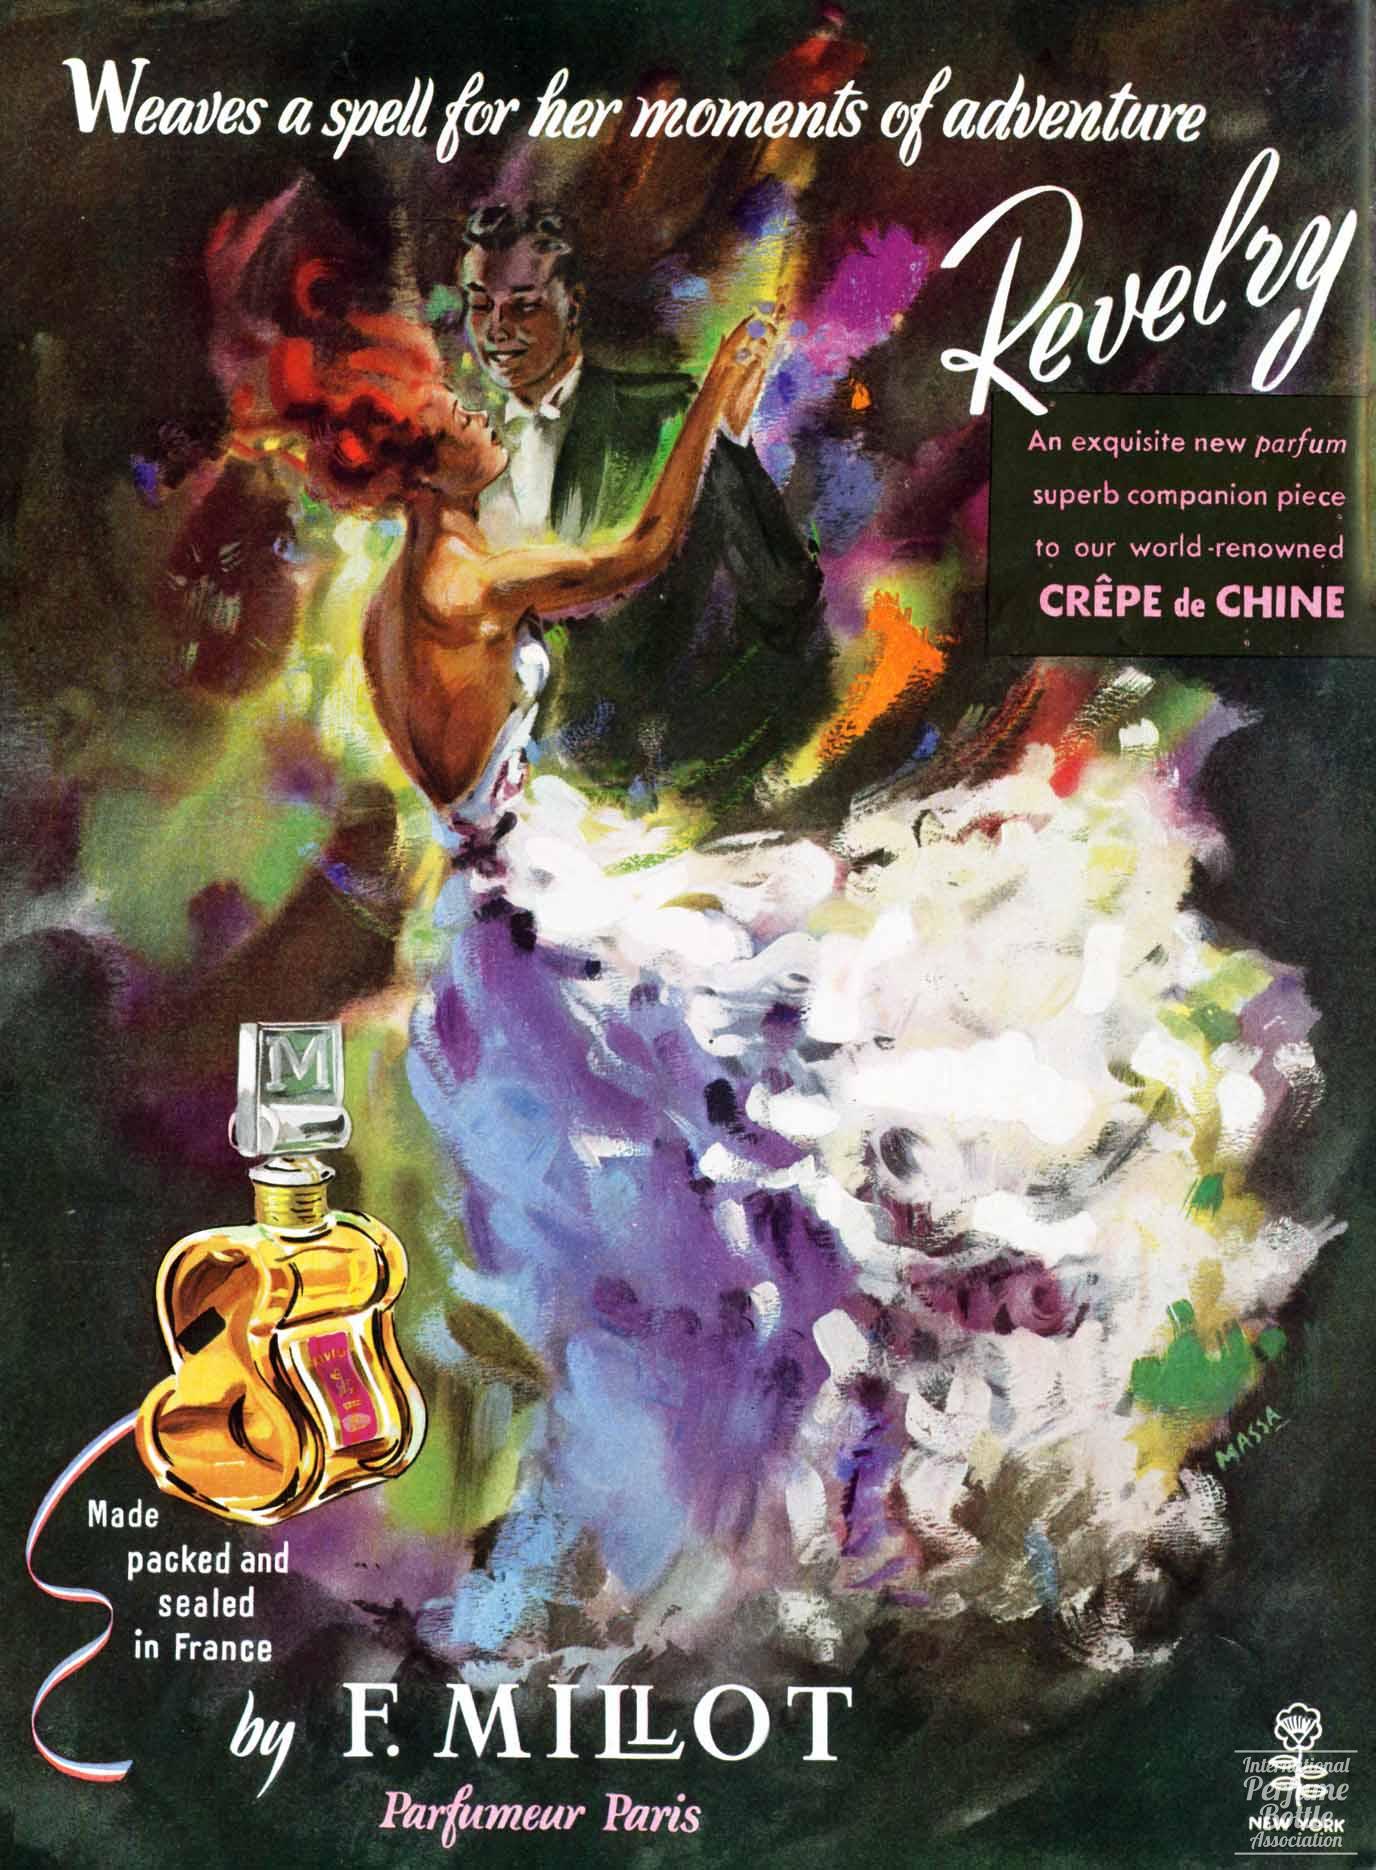 "Revelry" by F. Millot Advertisement - 1948